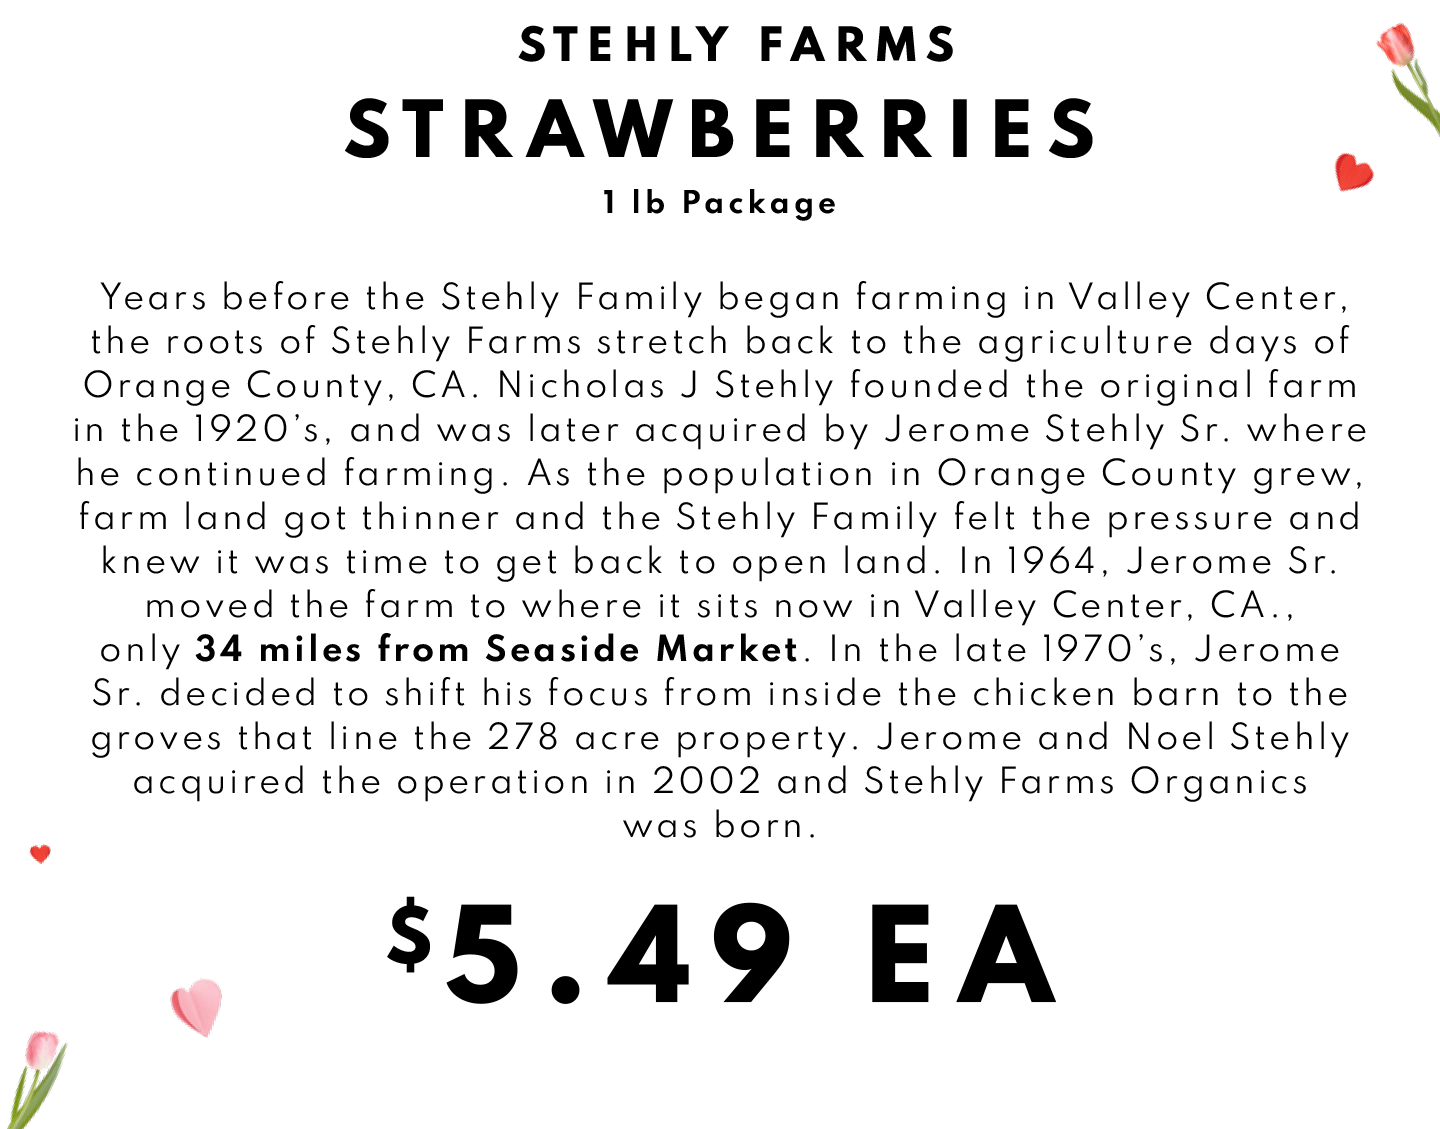 Stehly Farms STrawberries $5.49 ea